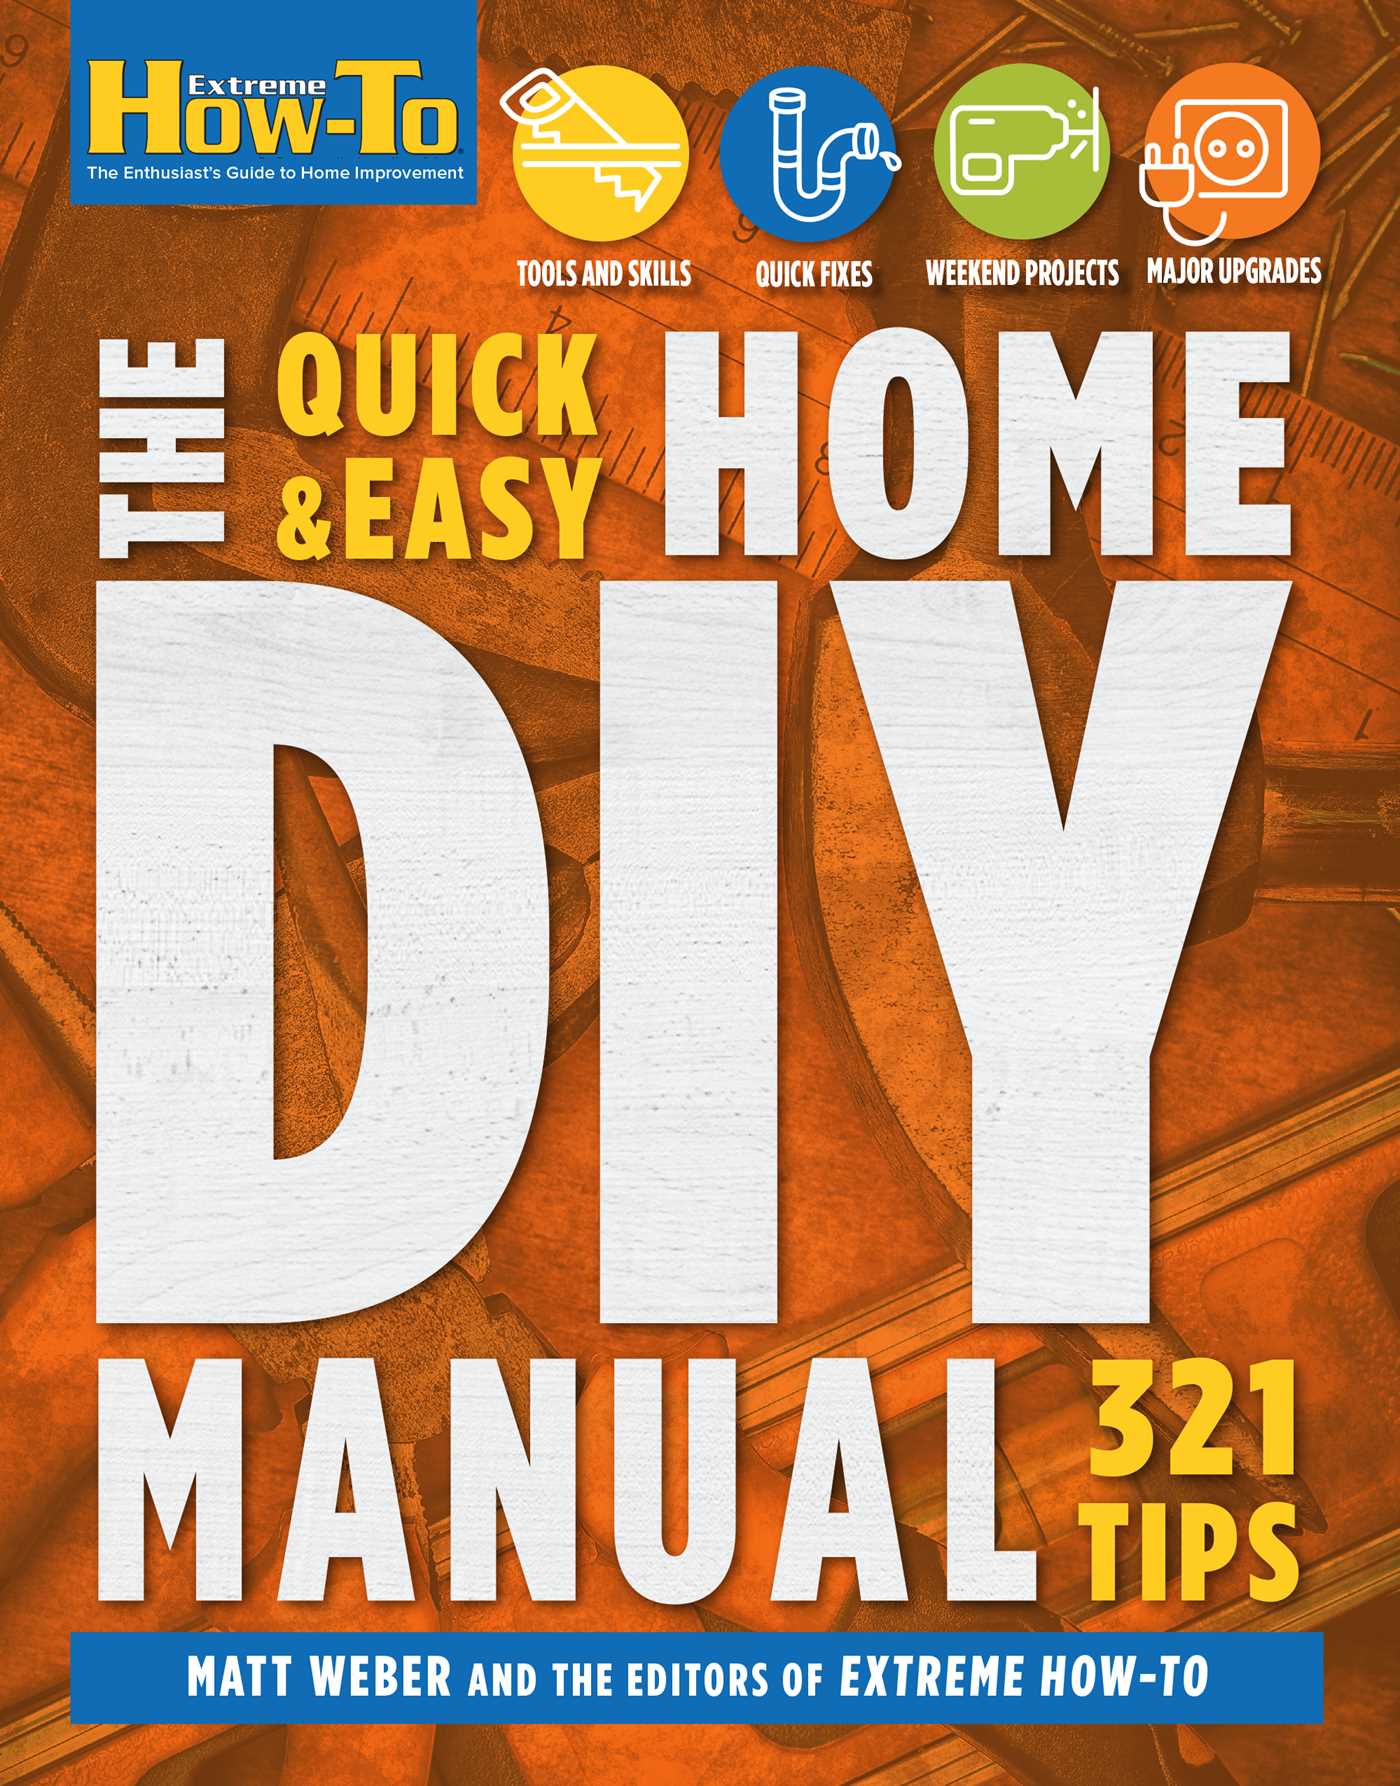 The Quick &amp; Easy Home DIY Manual: 324 Tips